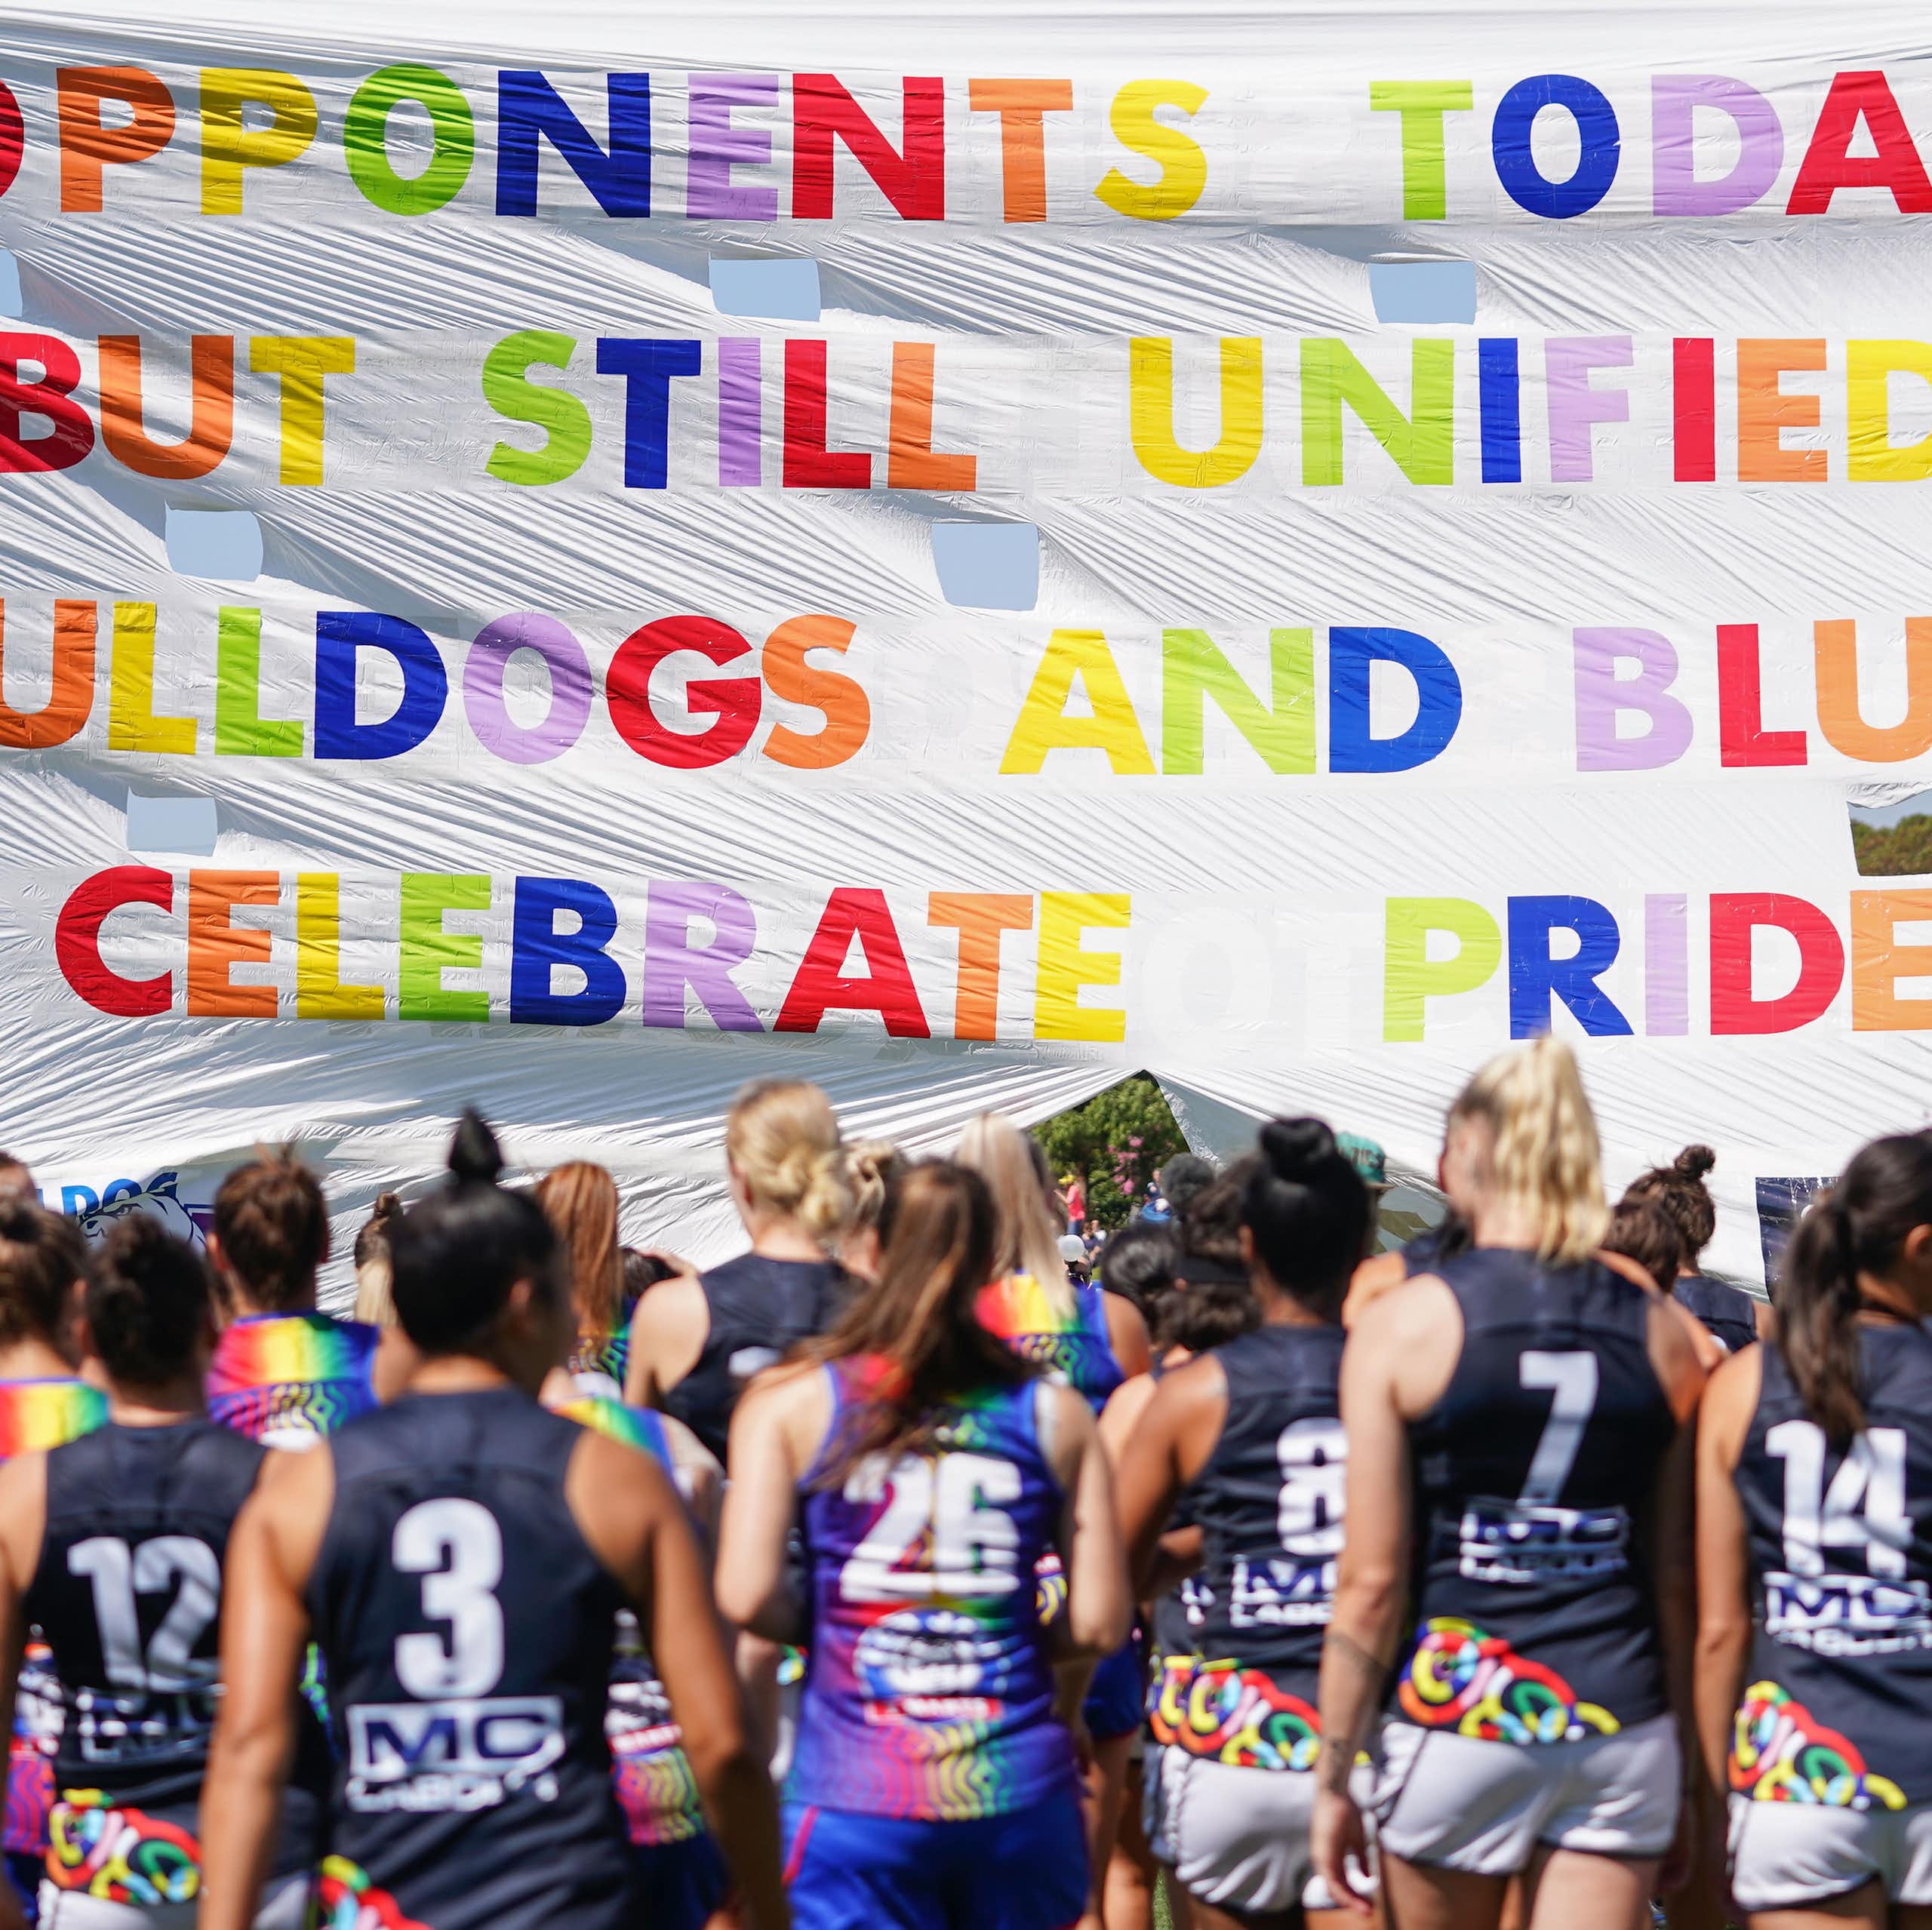 Bulldogs and Blues players run through the Pride banner ahead of an AFLW game